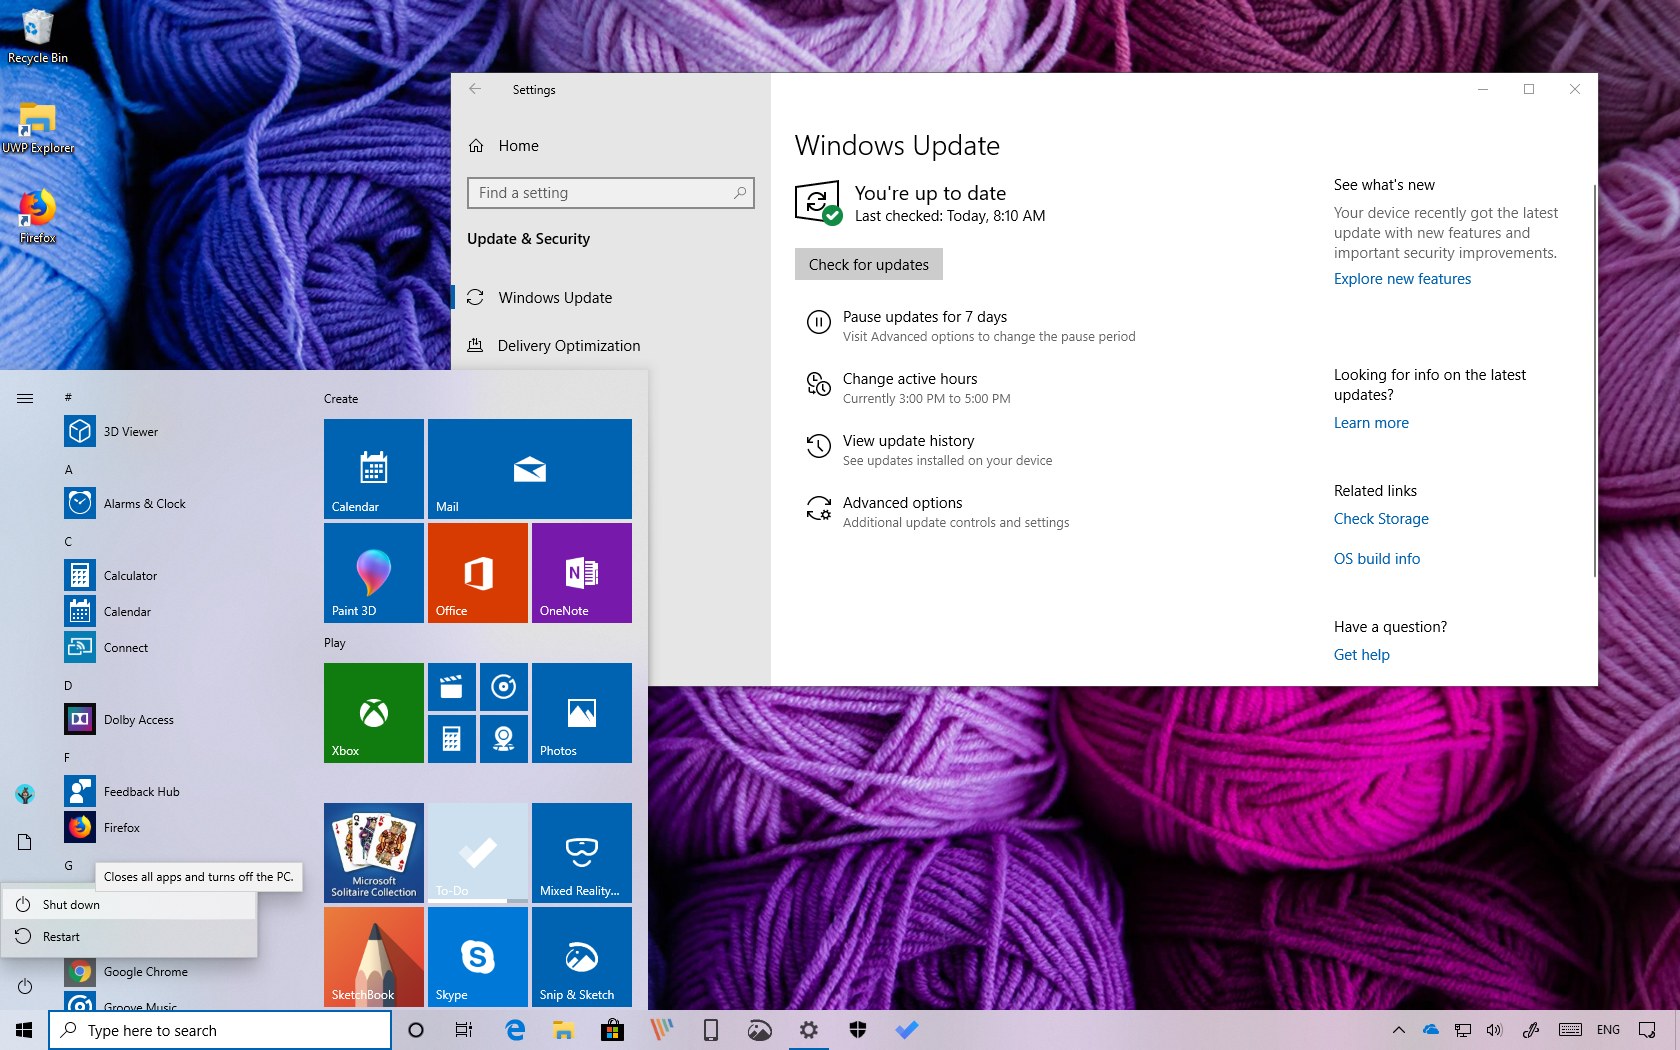 Windows 10 version 1903, May 2019 Update: All the new features and changes - Pureinfotech